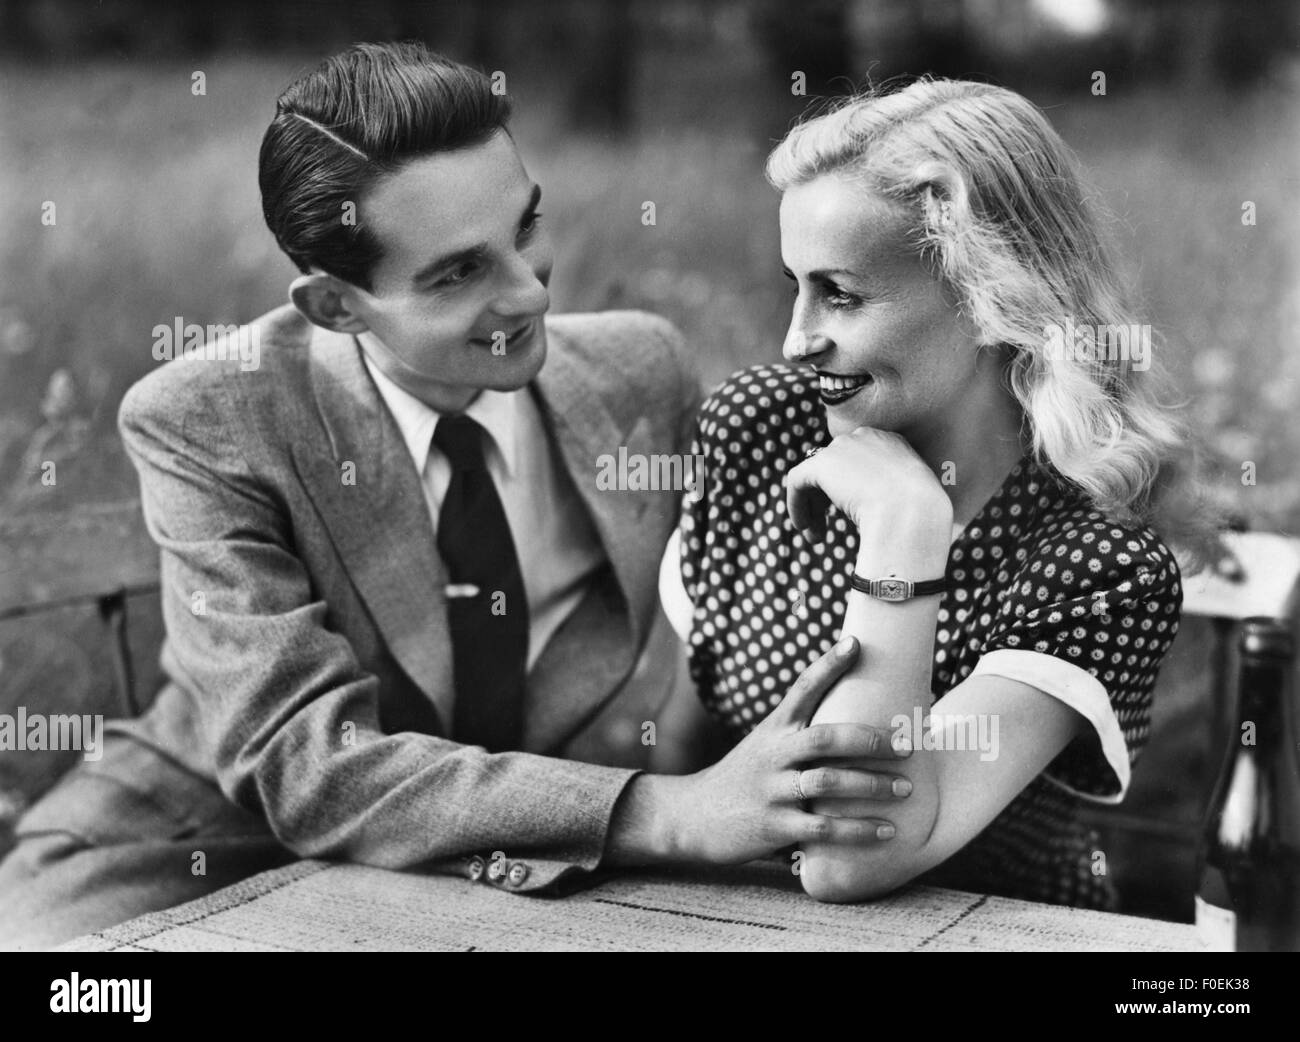 people, couples, lovers, young couple, picture postcard, 1930s, Additional-Rights-Clearences-Not Available Stock Photo